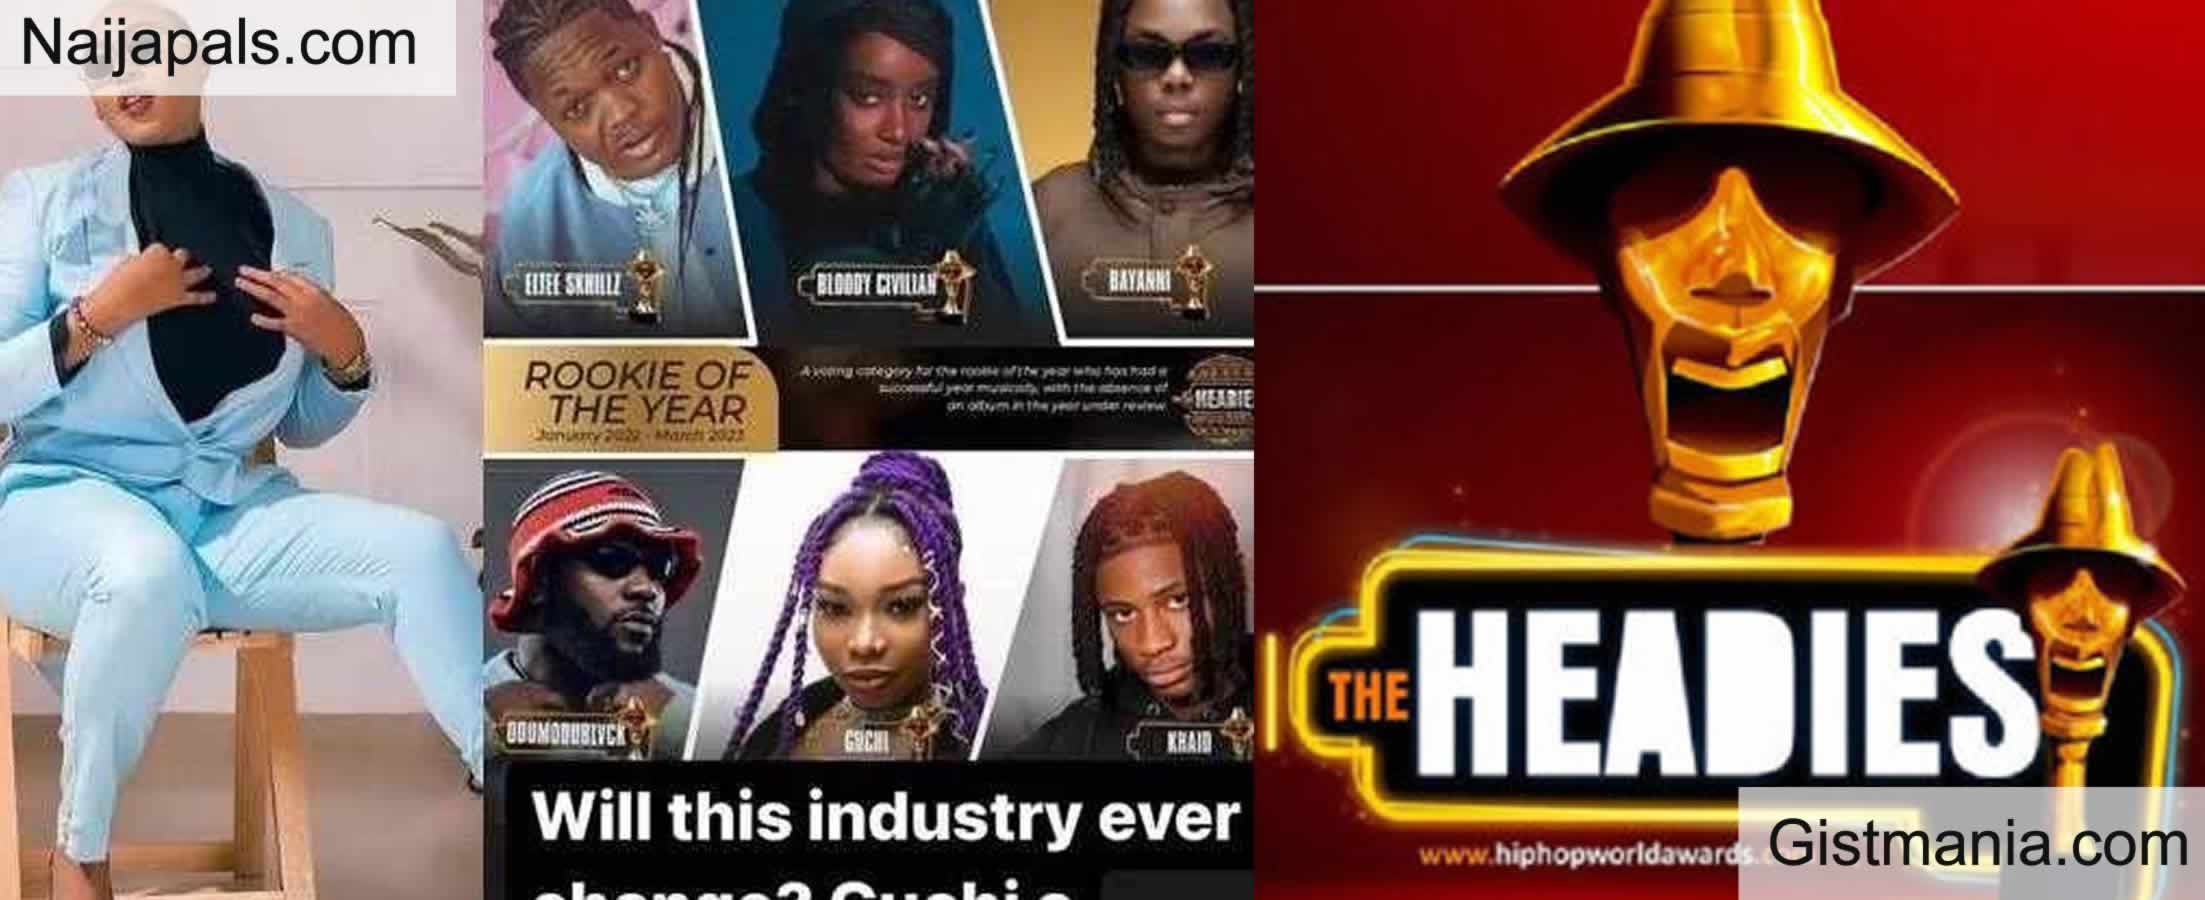 Cynthia Berates Singer Guchi's Nomination For Rookie Of The Year